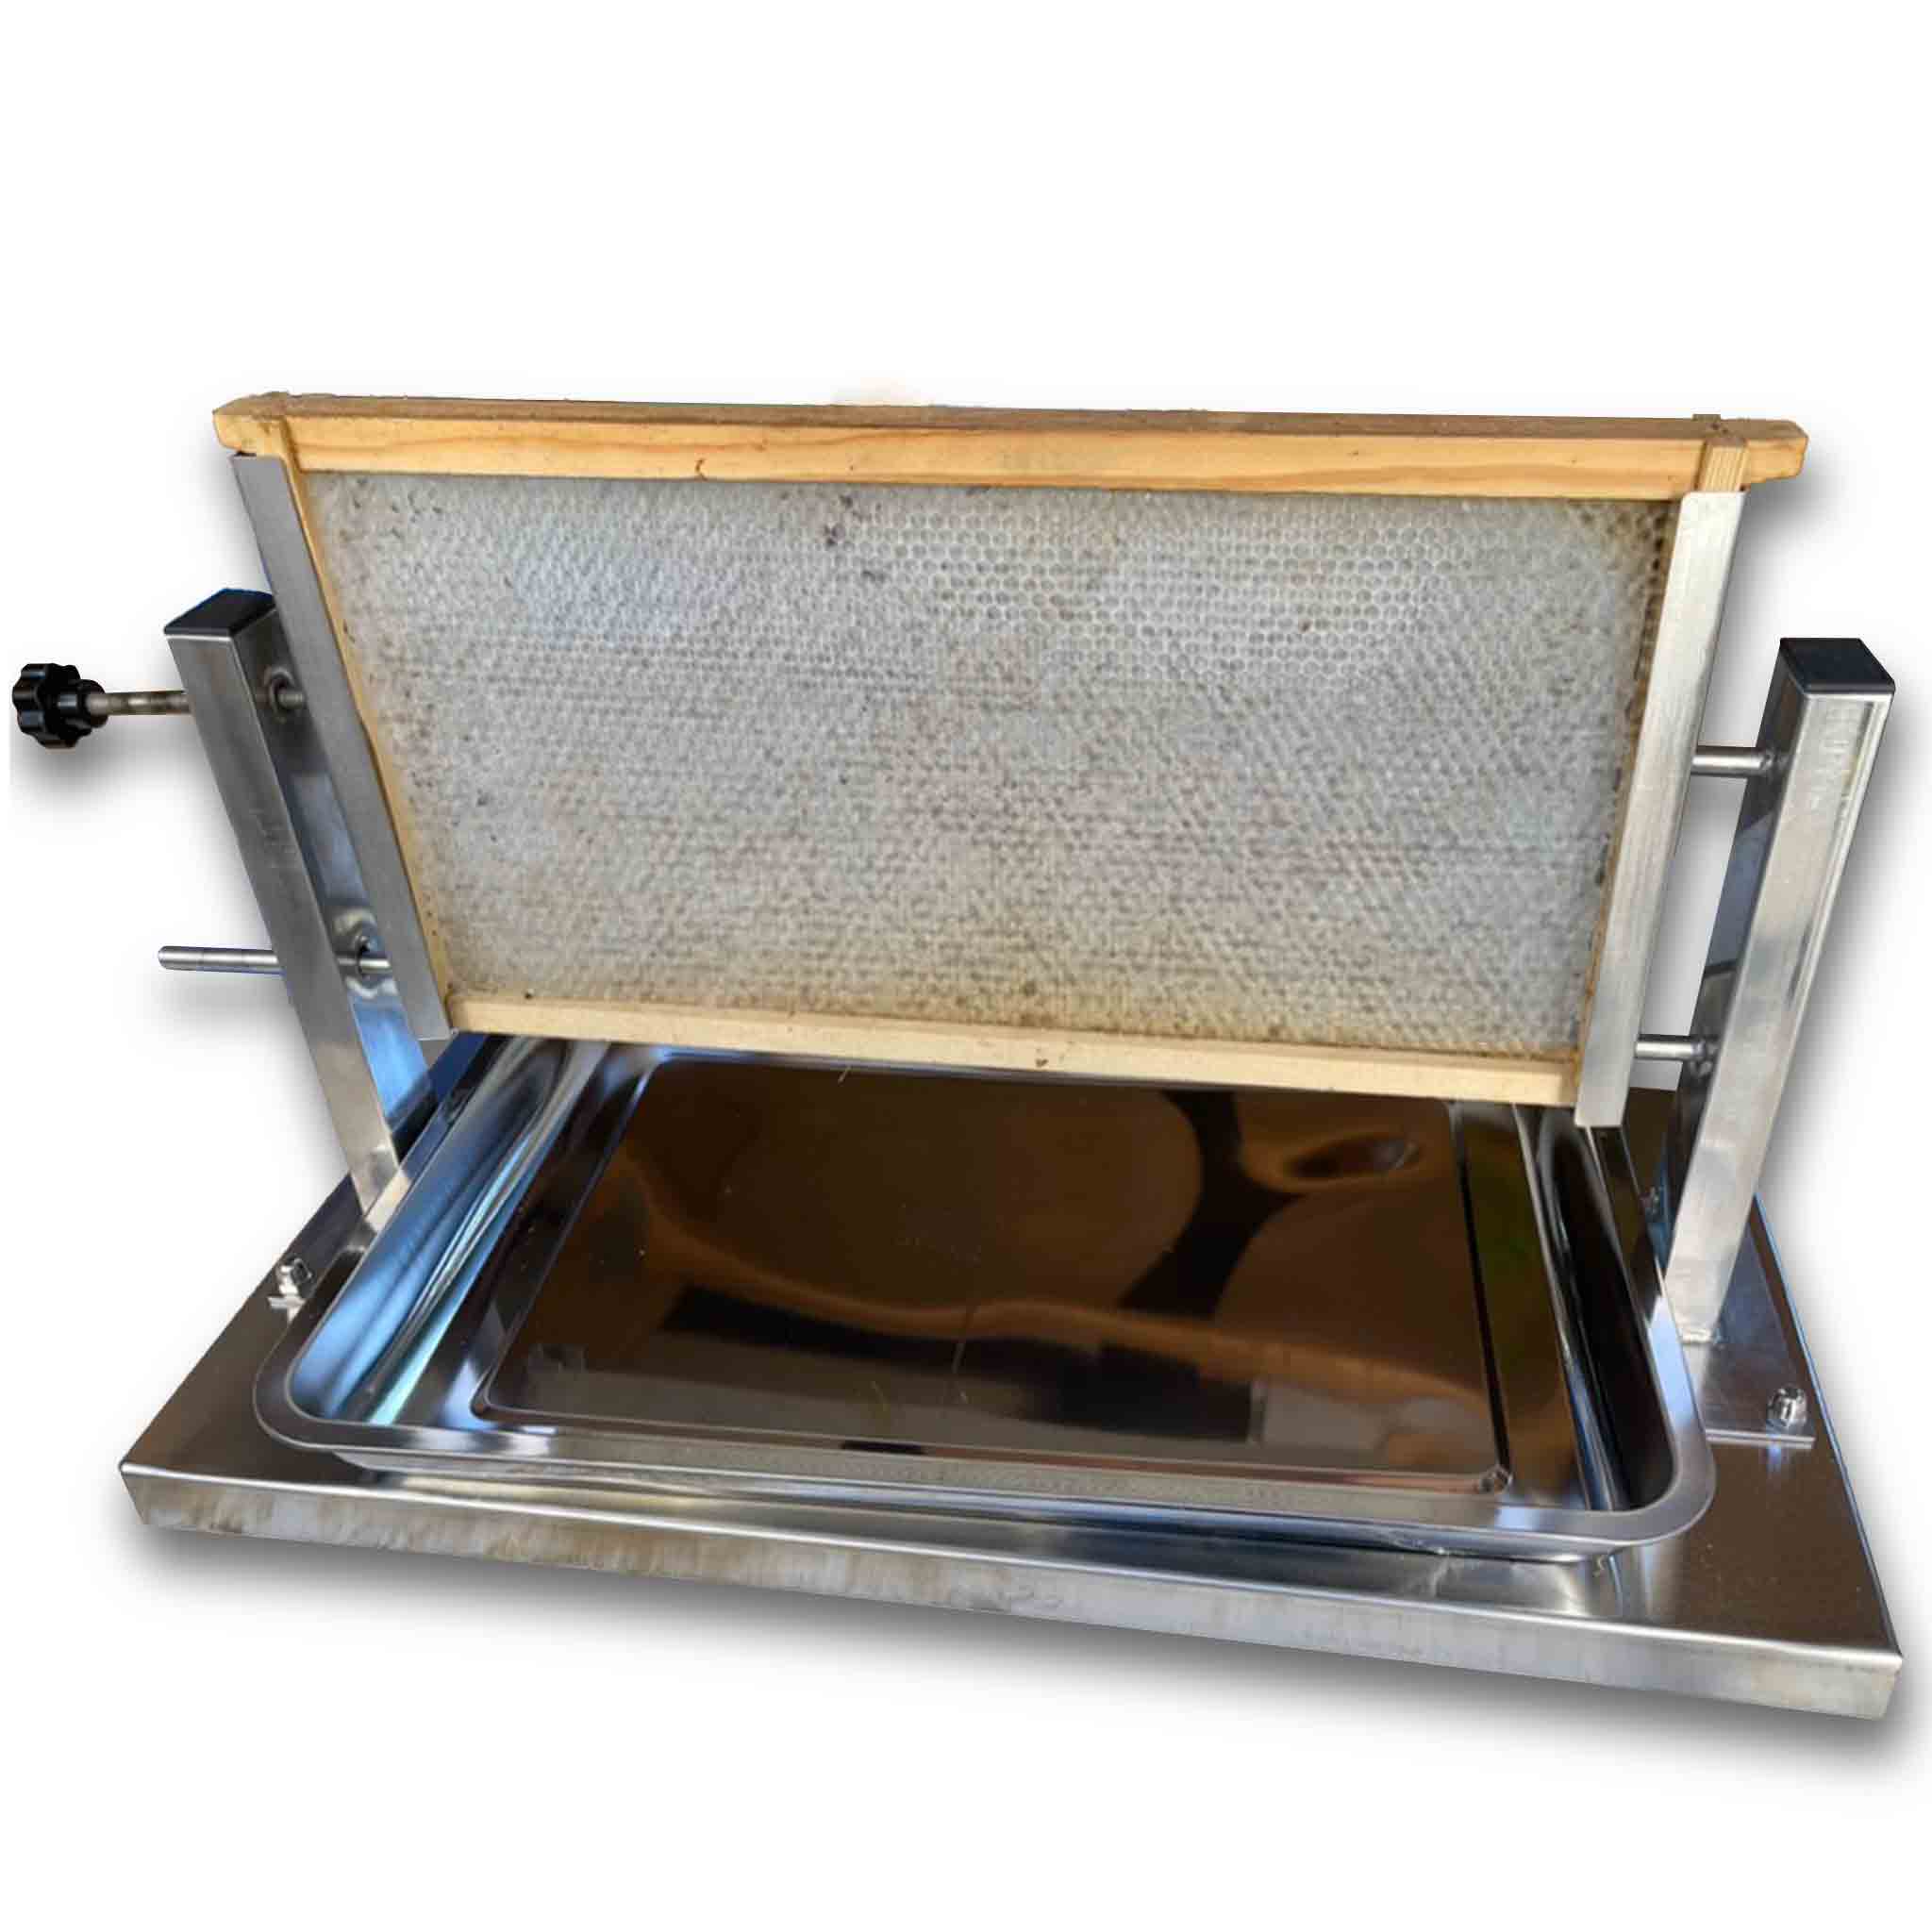 Honeycomb Stainless Steel Display Stand for holding a Honey Frame with Drip Tray for Restaurants and Cafe's - Display collection by Buzzbee Beekeeping Supplies